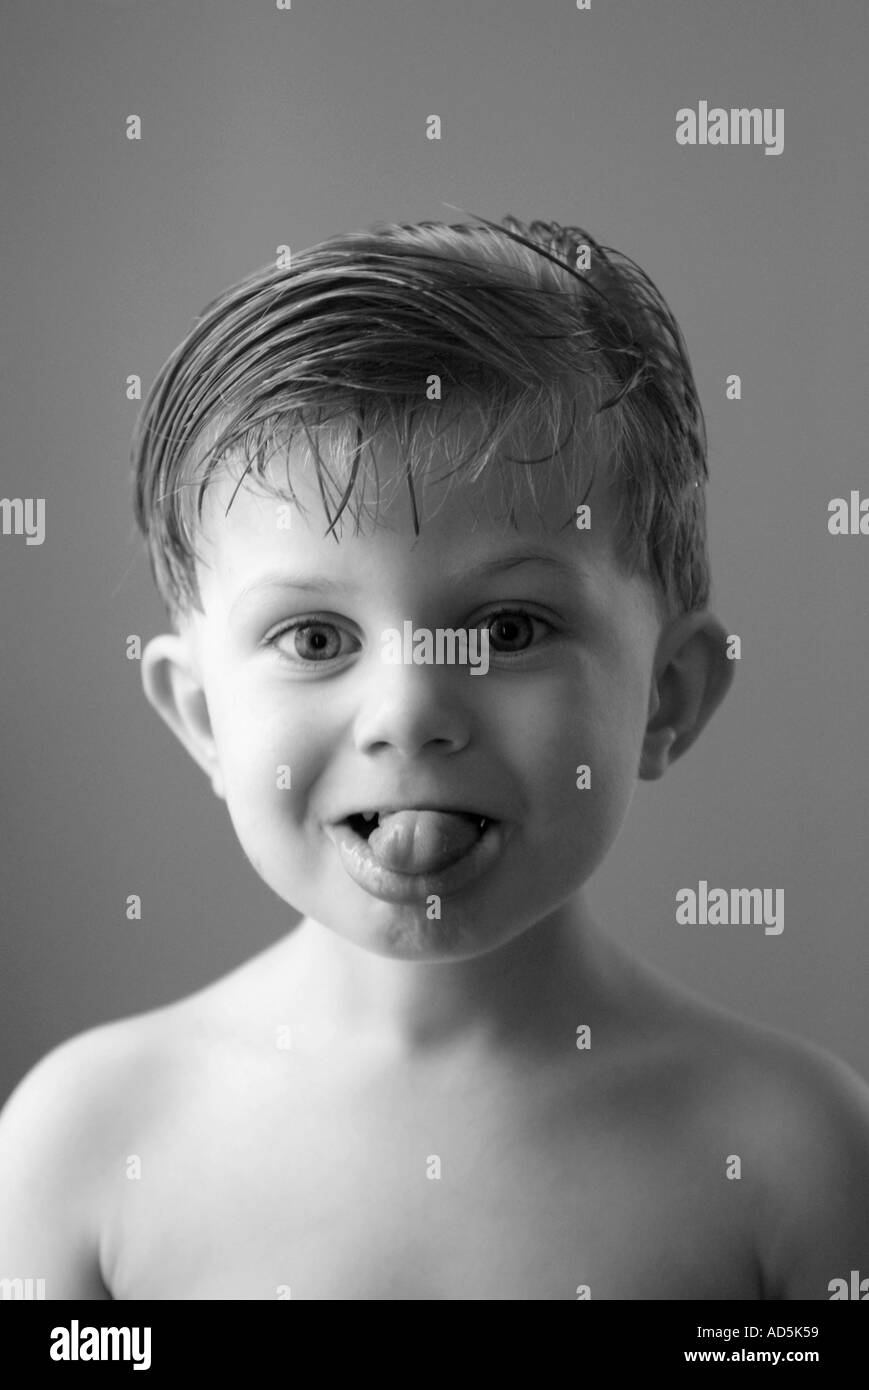 Child making funny face showing tongue 'Funny Face' Stock Photo